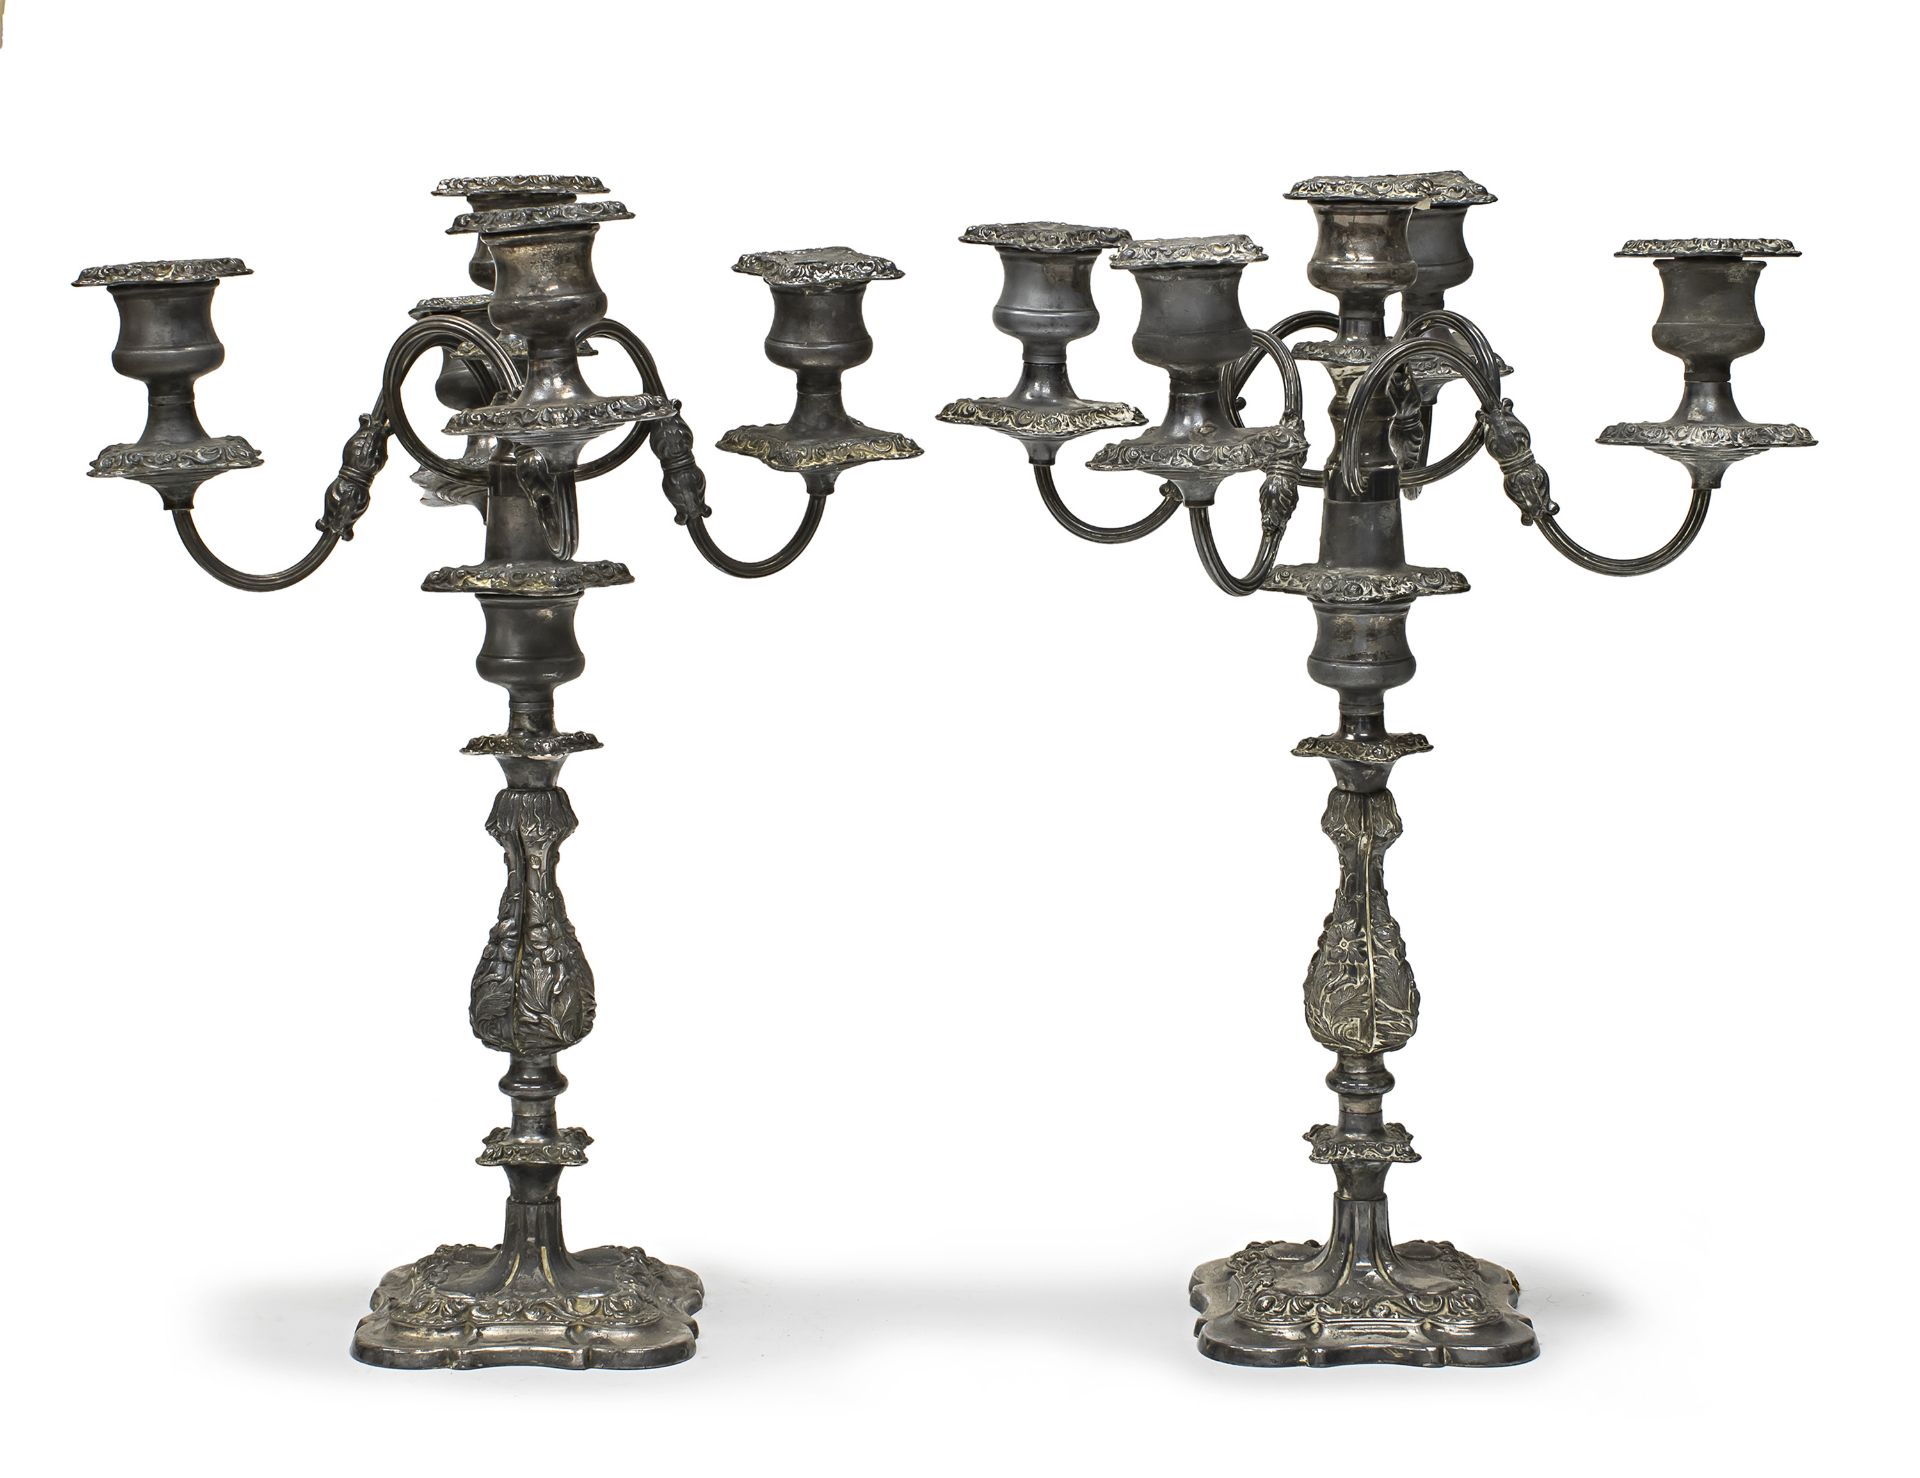 PAIR OF CANDELABRA IN SHEFFIELD ENGLAND EARLY 20TH CENTURY